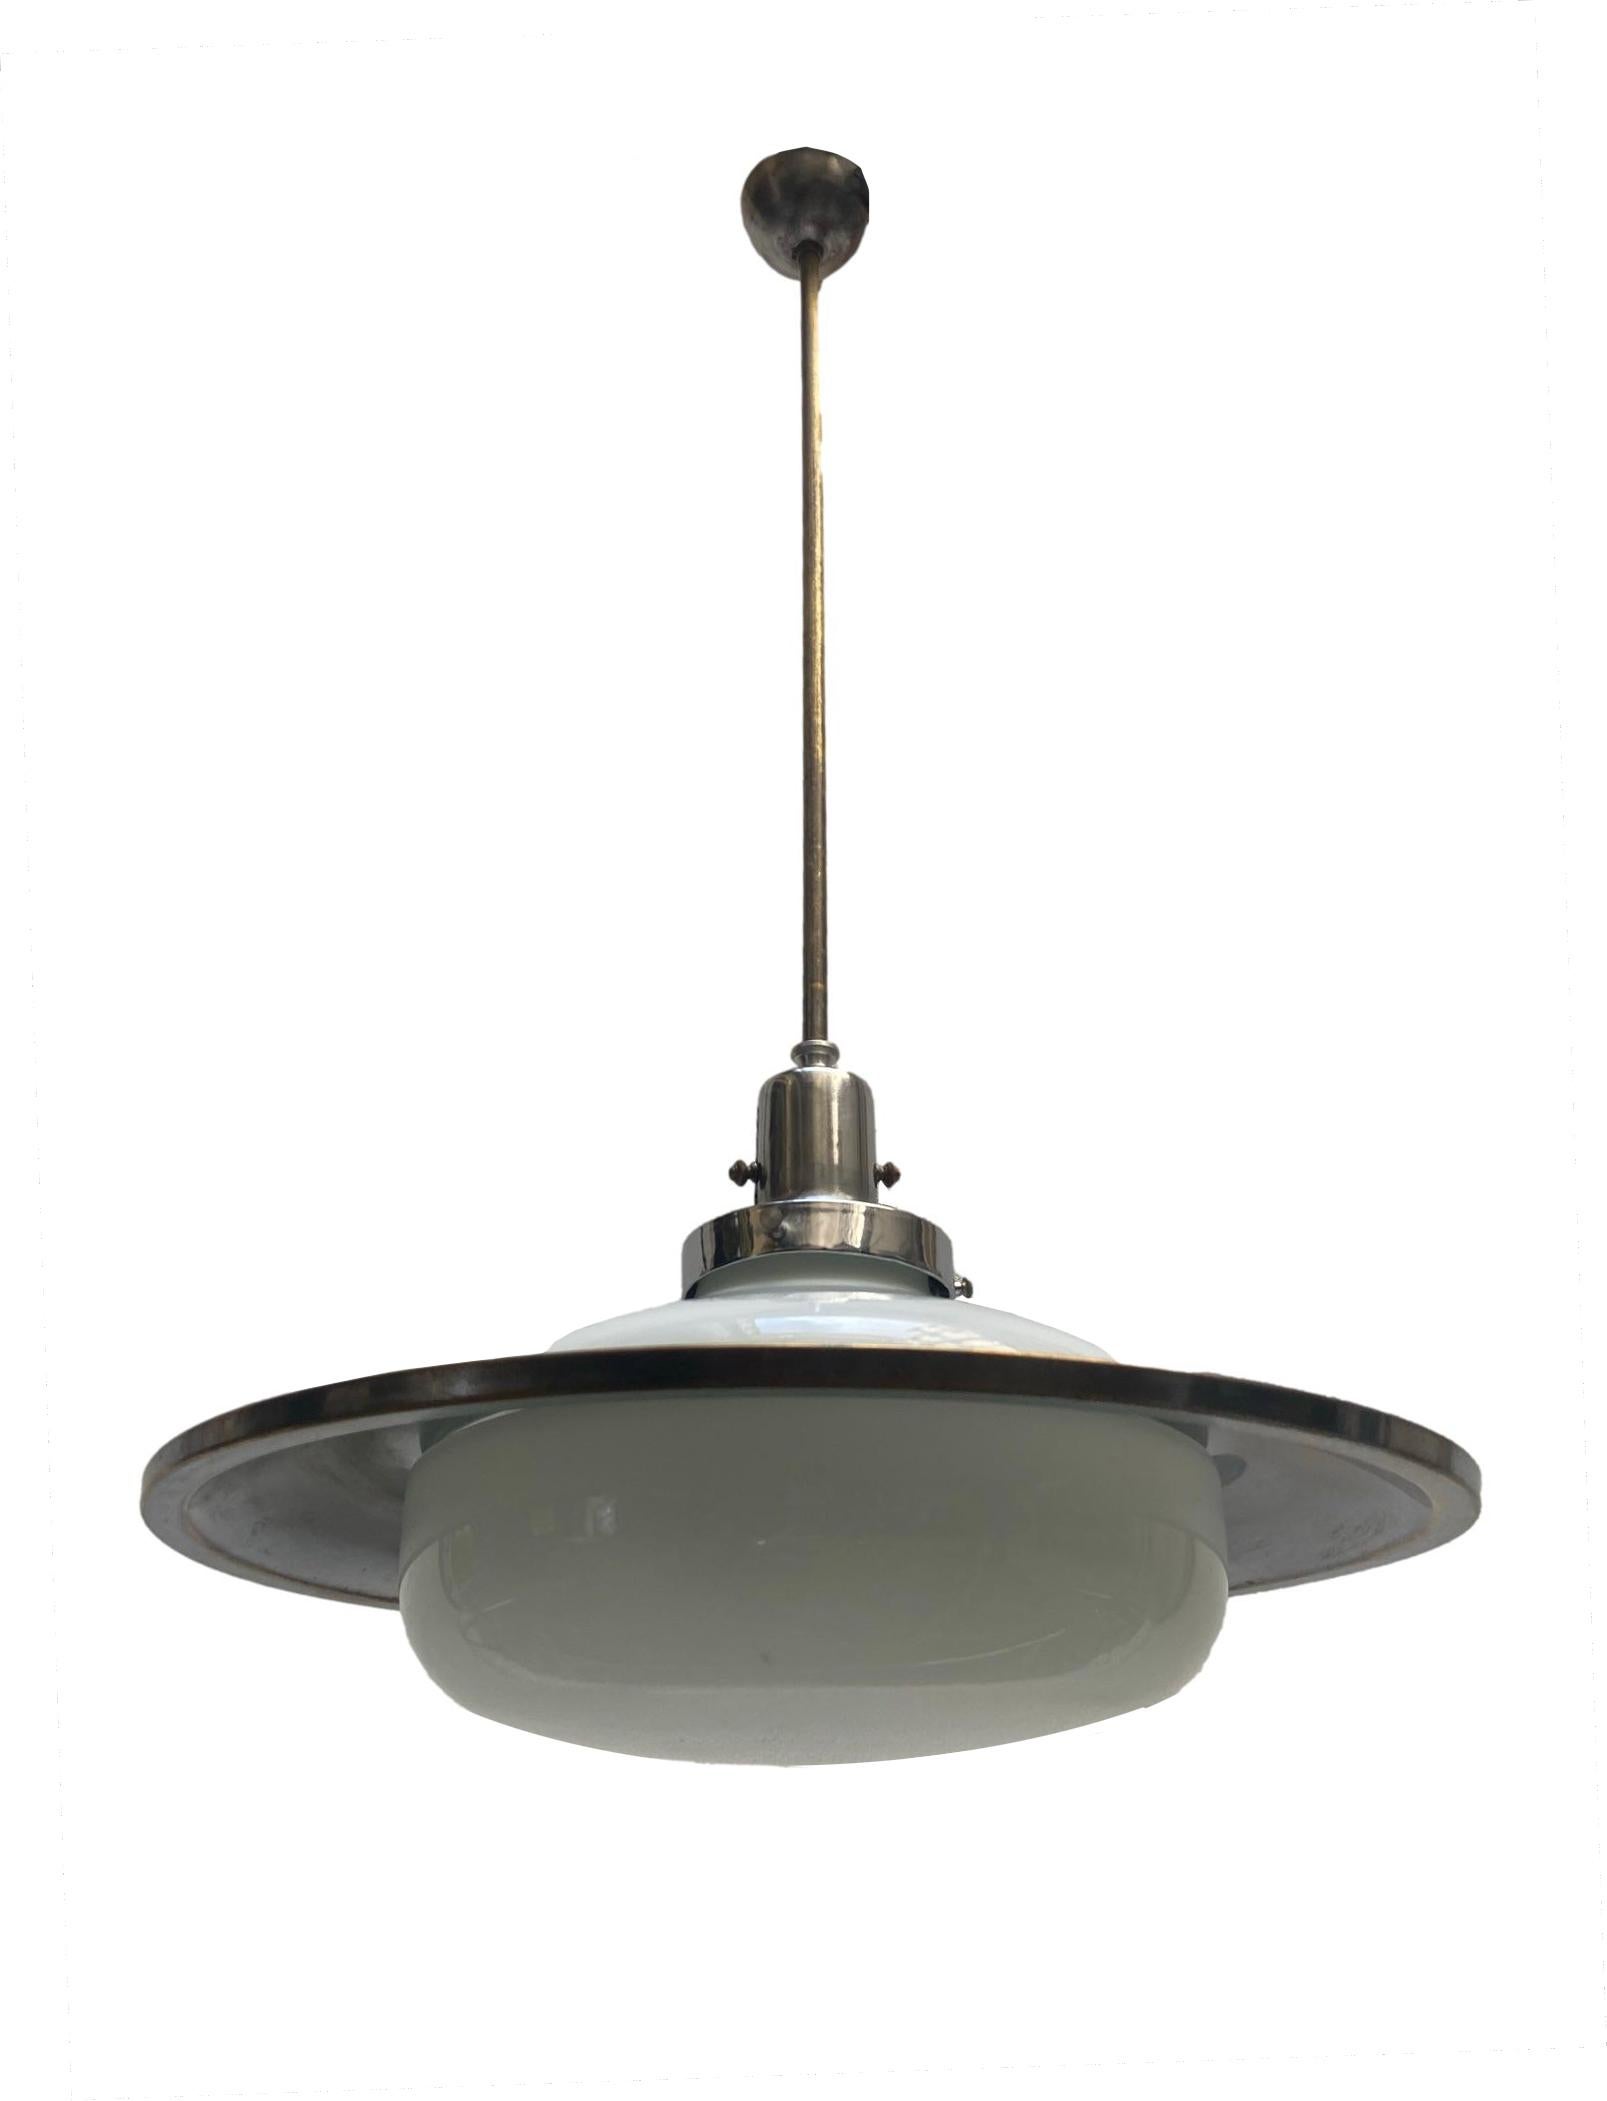 Rare suspension lamp in chromed brass and opal glass, design attributable to Gino Sarfatti. Dimmer on the lamp holder. Written engraved on the brass 